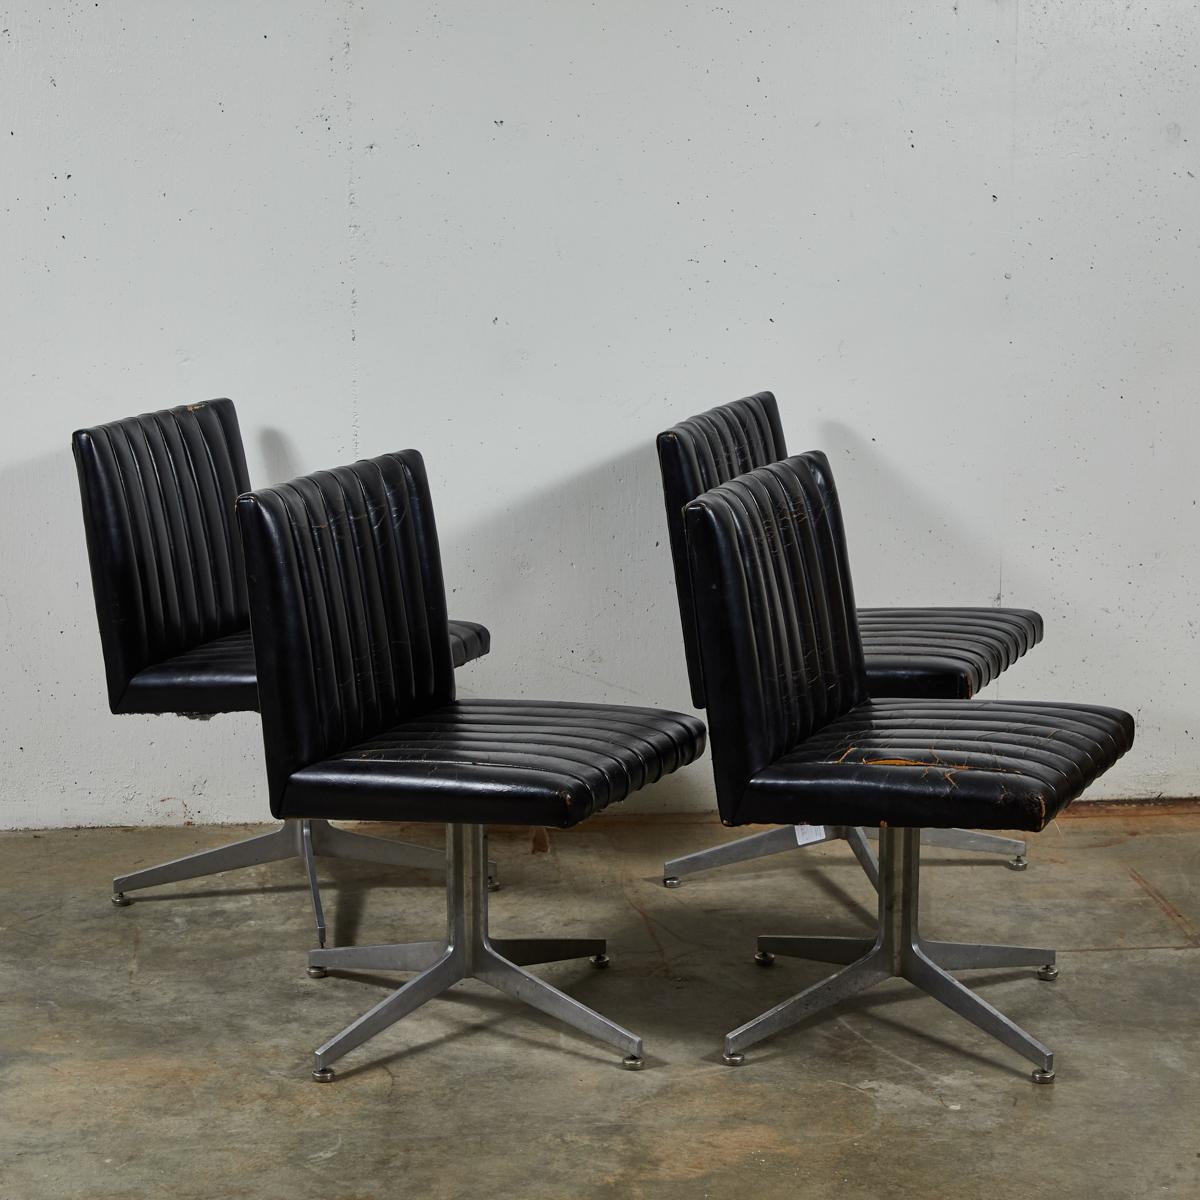 20th Century Mid-Century Modern Set of Four Swivel Chairs by Eames for Herman Miller